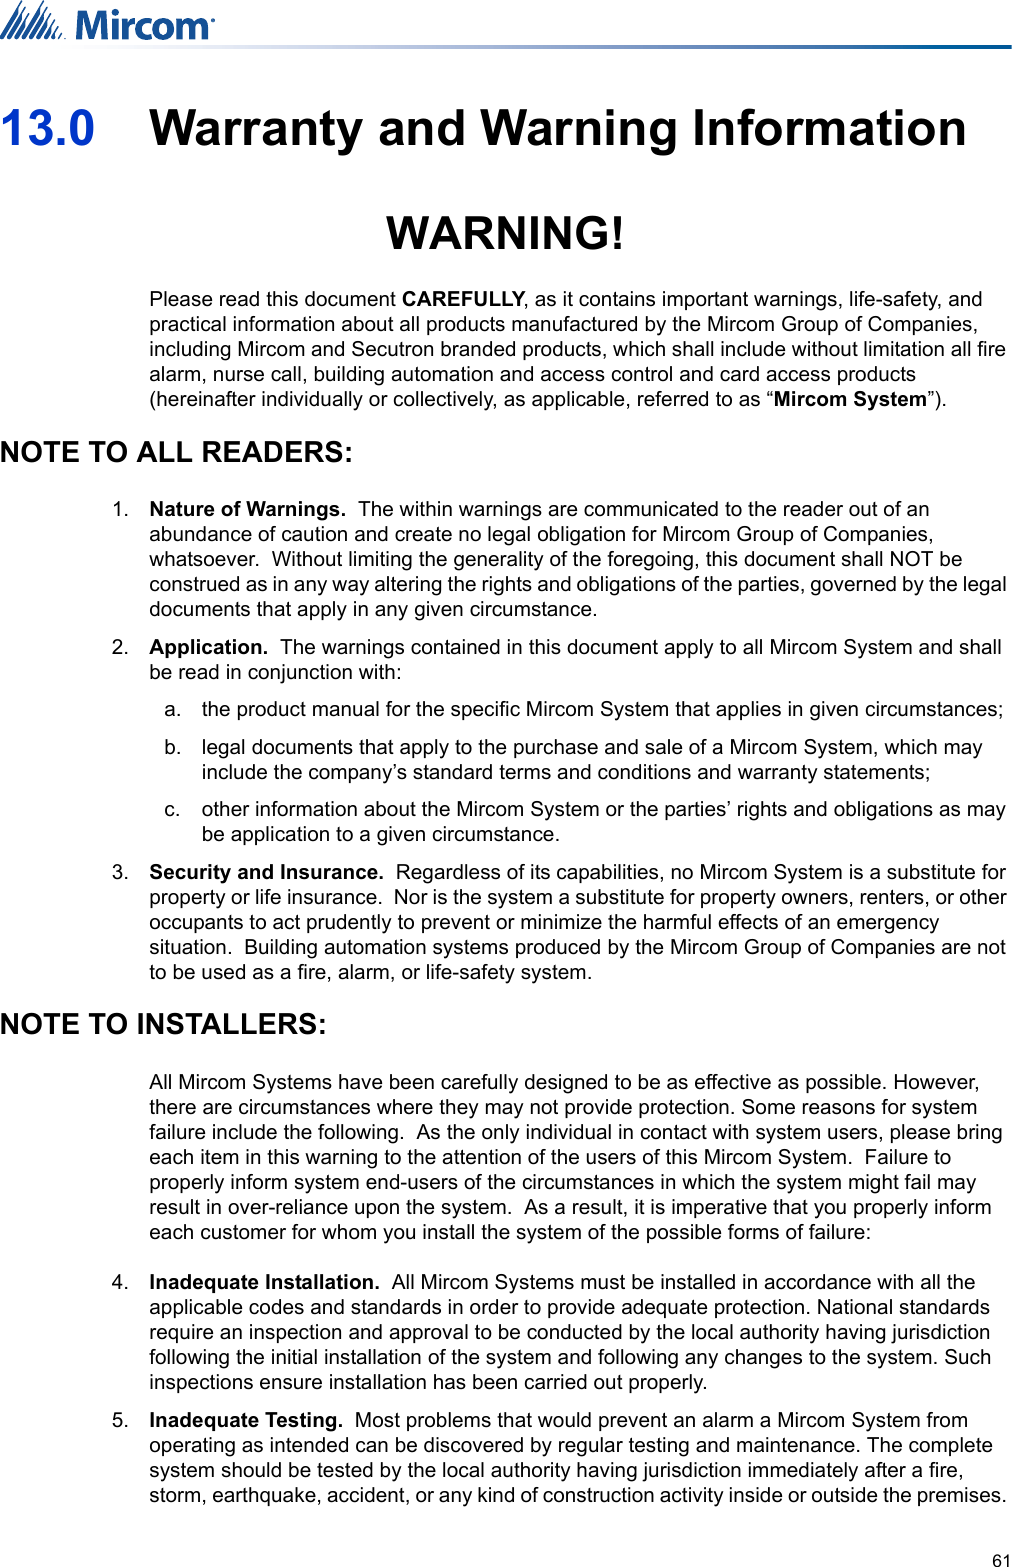 6113.0 Warranty and Warning InformationWARNING!Please read this document CAREFULLY, as it contains important warnings, life-safety, and practical information about all products manufactured by the Mircom Group of Companies, including Mircom and Secutron branded products, which shall include without limitation all fire alarm, nurse call, building automation and access control and card access products (hereinafter individually or collectively, as applicable, referred to as “Mircom System”).NOTE TO ALL READERS:1. Nature of Warnings.  The within warnings are communicated to the reader out of an abundance of caution and create no legal obligation for Mircom Group of Companies, whatsoever.  Without limiting the generality of the foregoing, this document shall NOT be construed as in any way altering the rights and obligations of the parties, governed by the legal documents that apply in any given circumstance.2. Application.  The warnings contained in this document apply to all Mircom System and shall be read in conjunction with:a. the product manual for the specific Mircom System that applies in given circumstances;b. legal documents that apply to the purchase and sale of a Mircom System, which may include the company’s standard terms and conditions and warranty statements; c. other information about the Mircom System or the parties’ rights and obligations as may be application to a given circumstance. 3. Security and Insurance.  Regardless of its capabilities, no Mircom System is a substitute for property or life insurance.  Nor is the system a substitute for property owners, renters, or other occupants to act prudently to prevent or minimize the harmful effects of an emergency situation.  Building automation systems produced by the Mircom Group of Companies are not to be used as a fire, alarm, or life-safety system.NOTE TO INSTALLERS:All Mircom Systems have been carefully designed to be as effective as possible. However, there are circumstances where they may not provide protection. Some reasons for system failure include the following.  As the only individual in contact with system users, please bring each item in this warning to the attention of the users of this Mircom System.  Failure to properly inform system end-users of the circumstances in which the system might fail may result in over-reliance upon the system.  As a result, it is imperative that you properly inform each customer for whom you install the system of the possible forms of failure:4. Inadequate Installation.  All Mircom Systems must be installed in accordance with all the applicable codes and standards in order to provide adequate protection. National standards require an inspection and approval to be conducted by the local authority having jurisdiction following the initial installation of the system and following any changes to the system. Such inspections ensure installation has been carried out properly.5. Inadequate Testing.  Most problems that would prevent an alarm a Mircom System from operating as intended can be discovered by regular testing and maintenance. The complete system should be tested by the local authority having jurisdiction immediately after a fire, storm, earthquake, accident, or any kind of construction activity inside or outside the premises. 